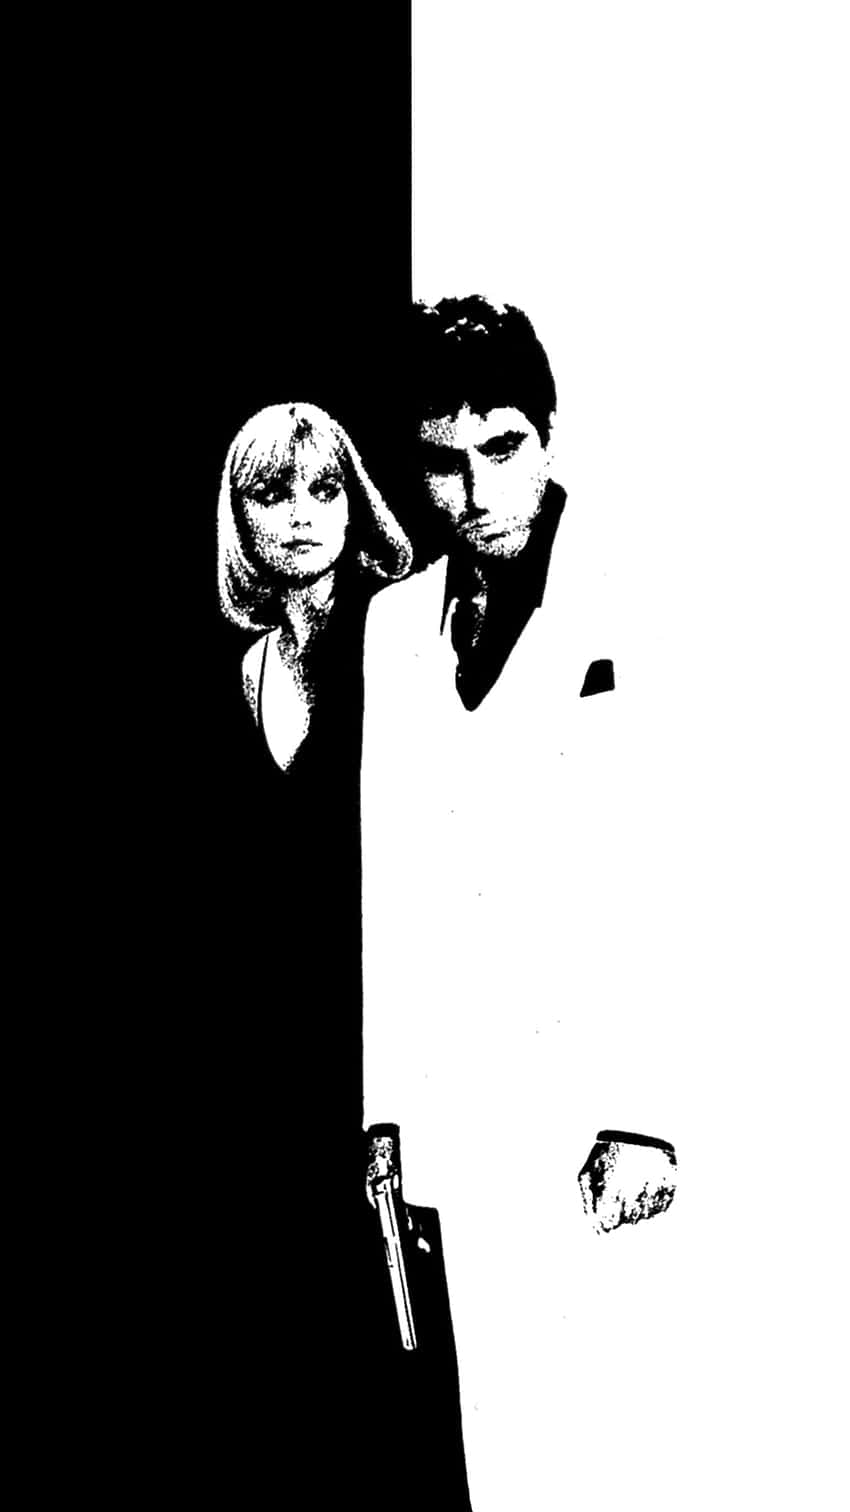 Own the gangster lifestyle with an iPhone featuring the iconic Scarface logo Wallpaper